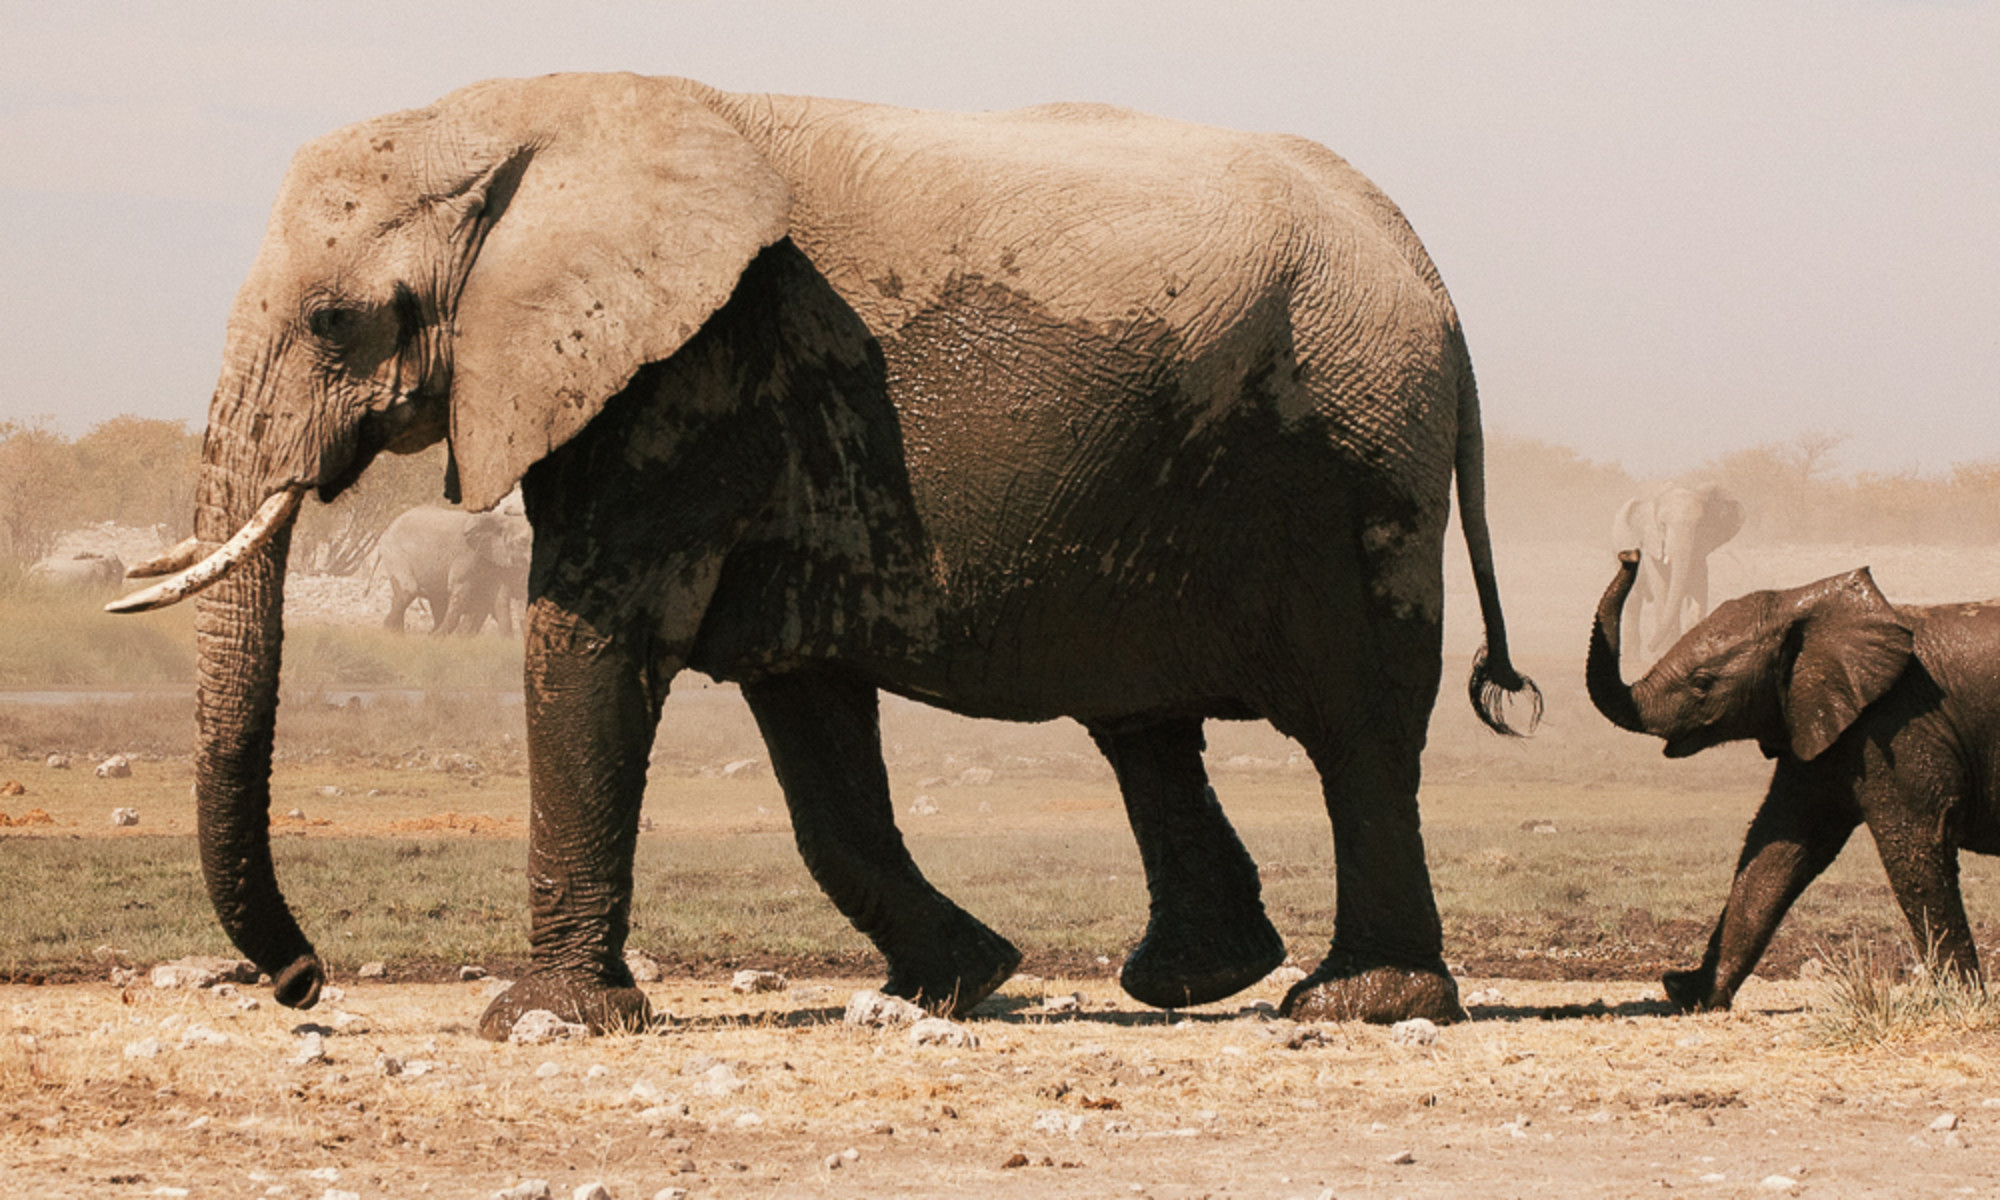 What Does It Mean That Another Giant Elephant Has Fallen?